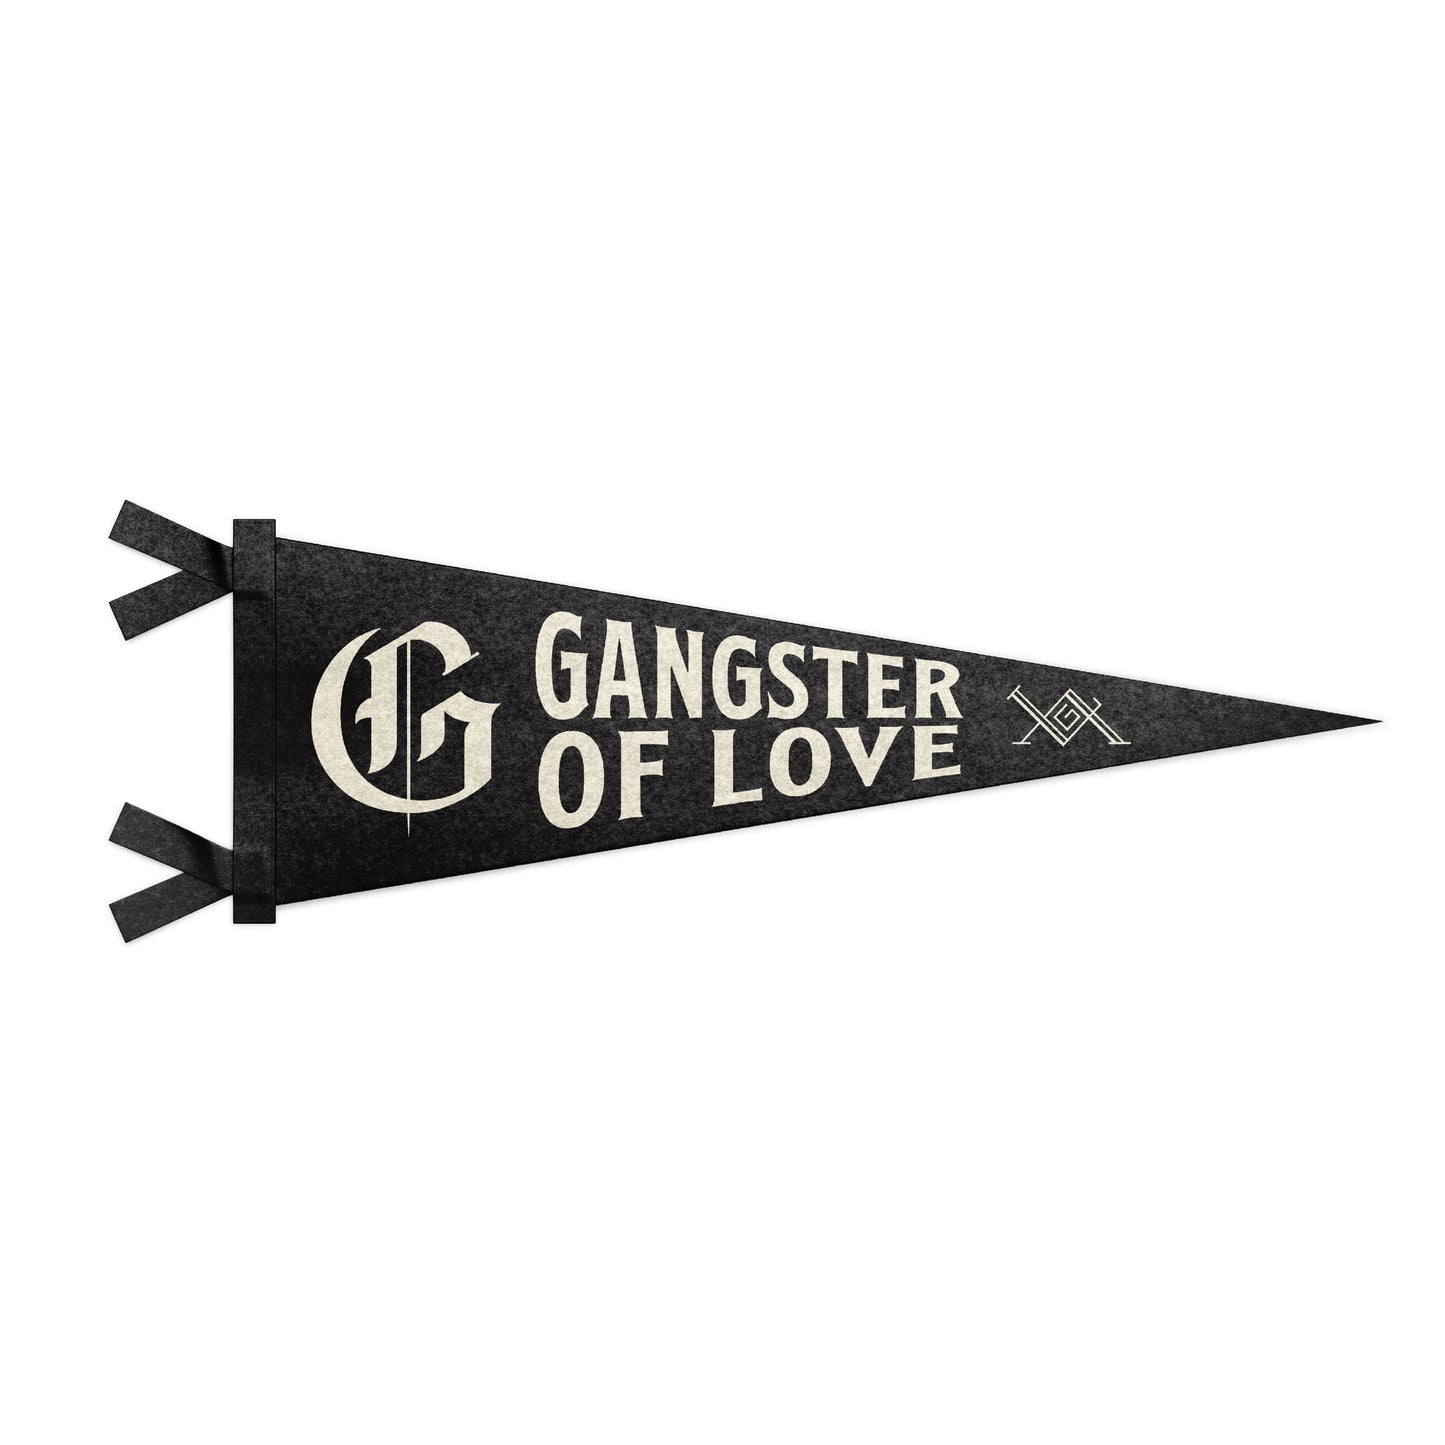 LAG Gangster Of Love Limited Edition Pennant